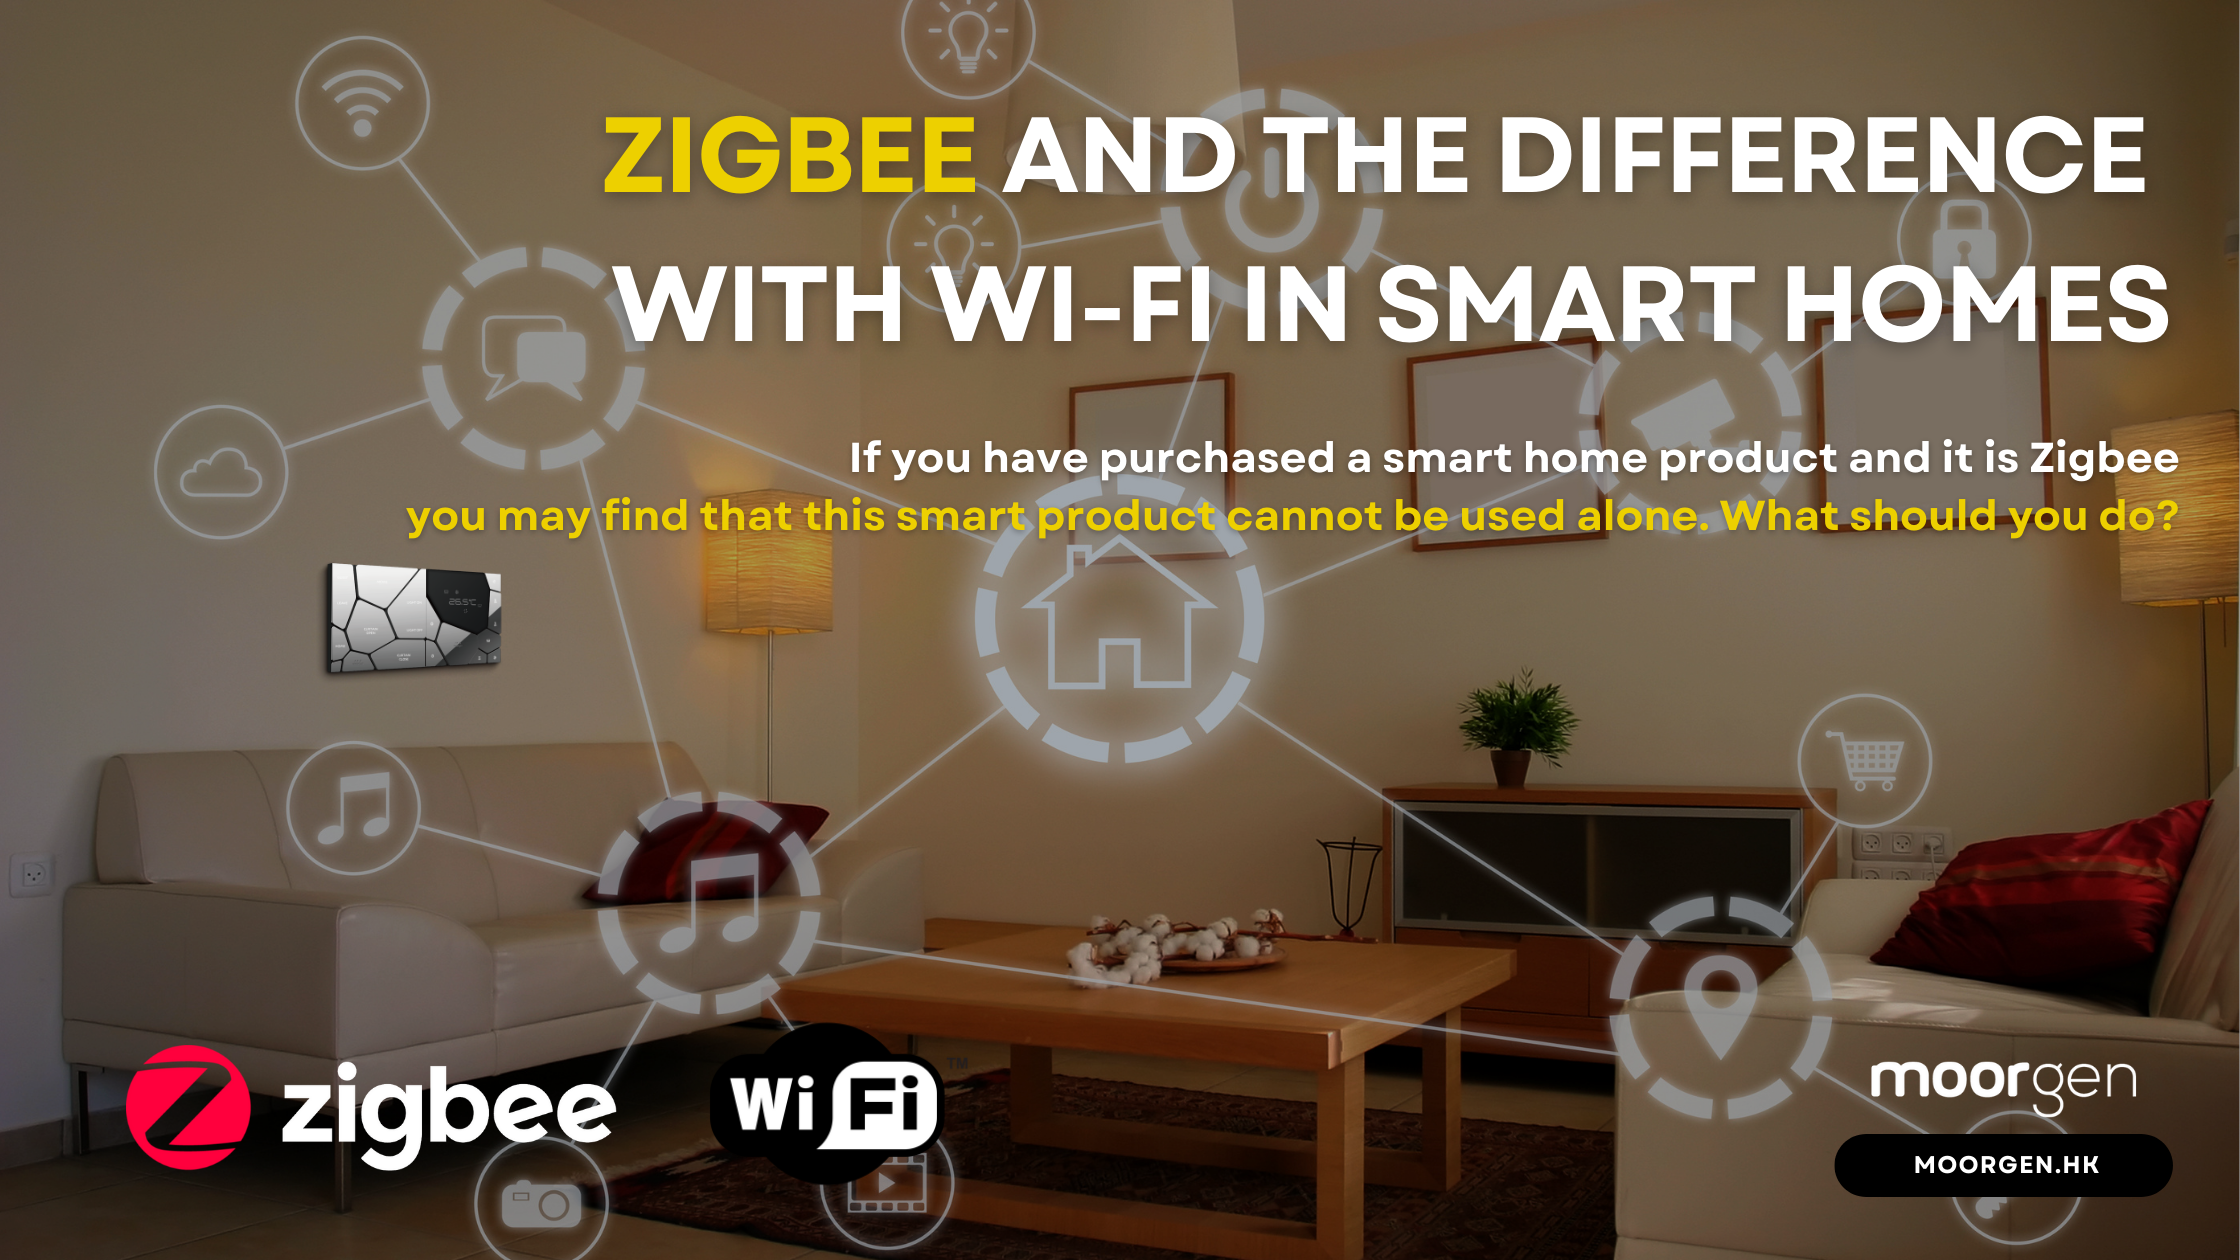 Zigbee and the Difference with Wi-Fi in Smart Homes – Moorgen Smart Home